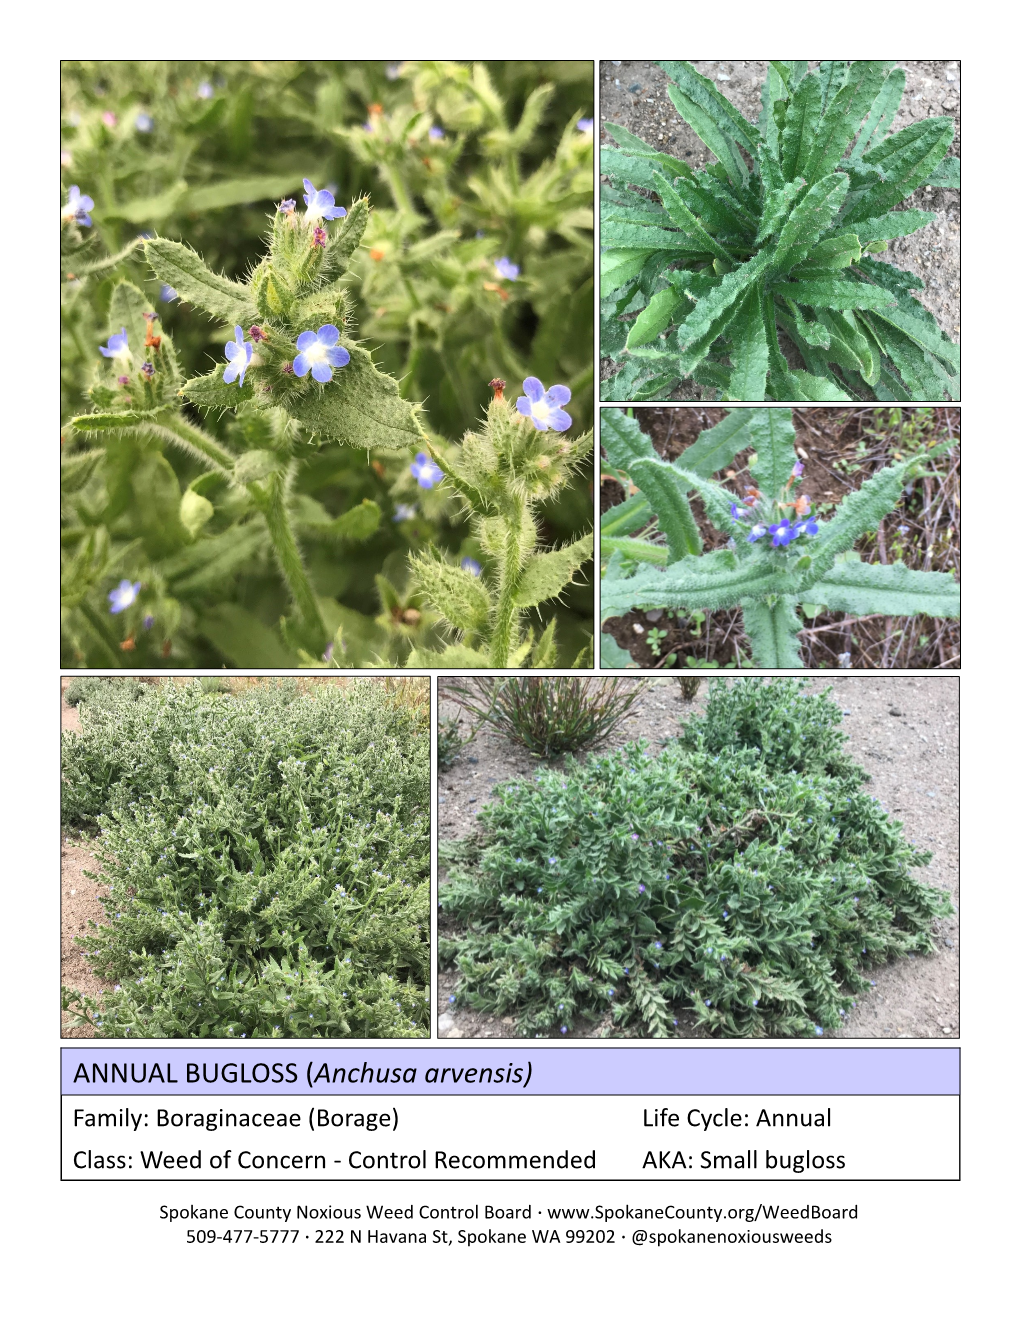 ANNUAL BUGLOSS (Anchusa Arvensis) Family: Boraginaceae (Borage) Life Cycle: Annual Class: Weed of Concern - Control Recommended AKA: Small Bugloss